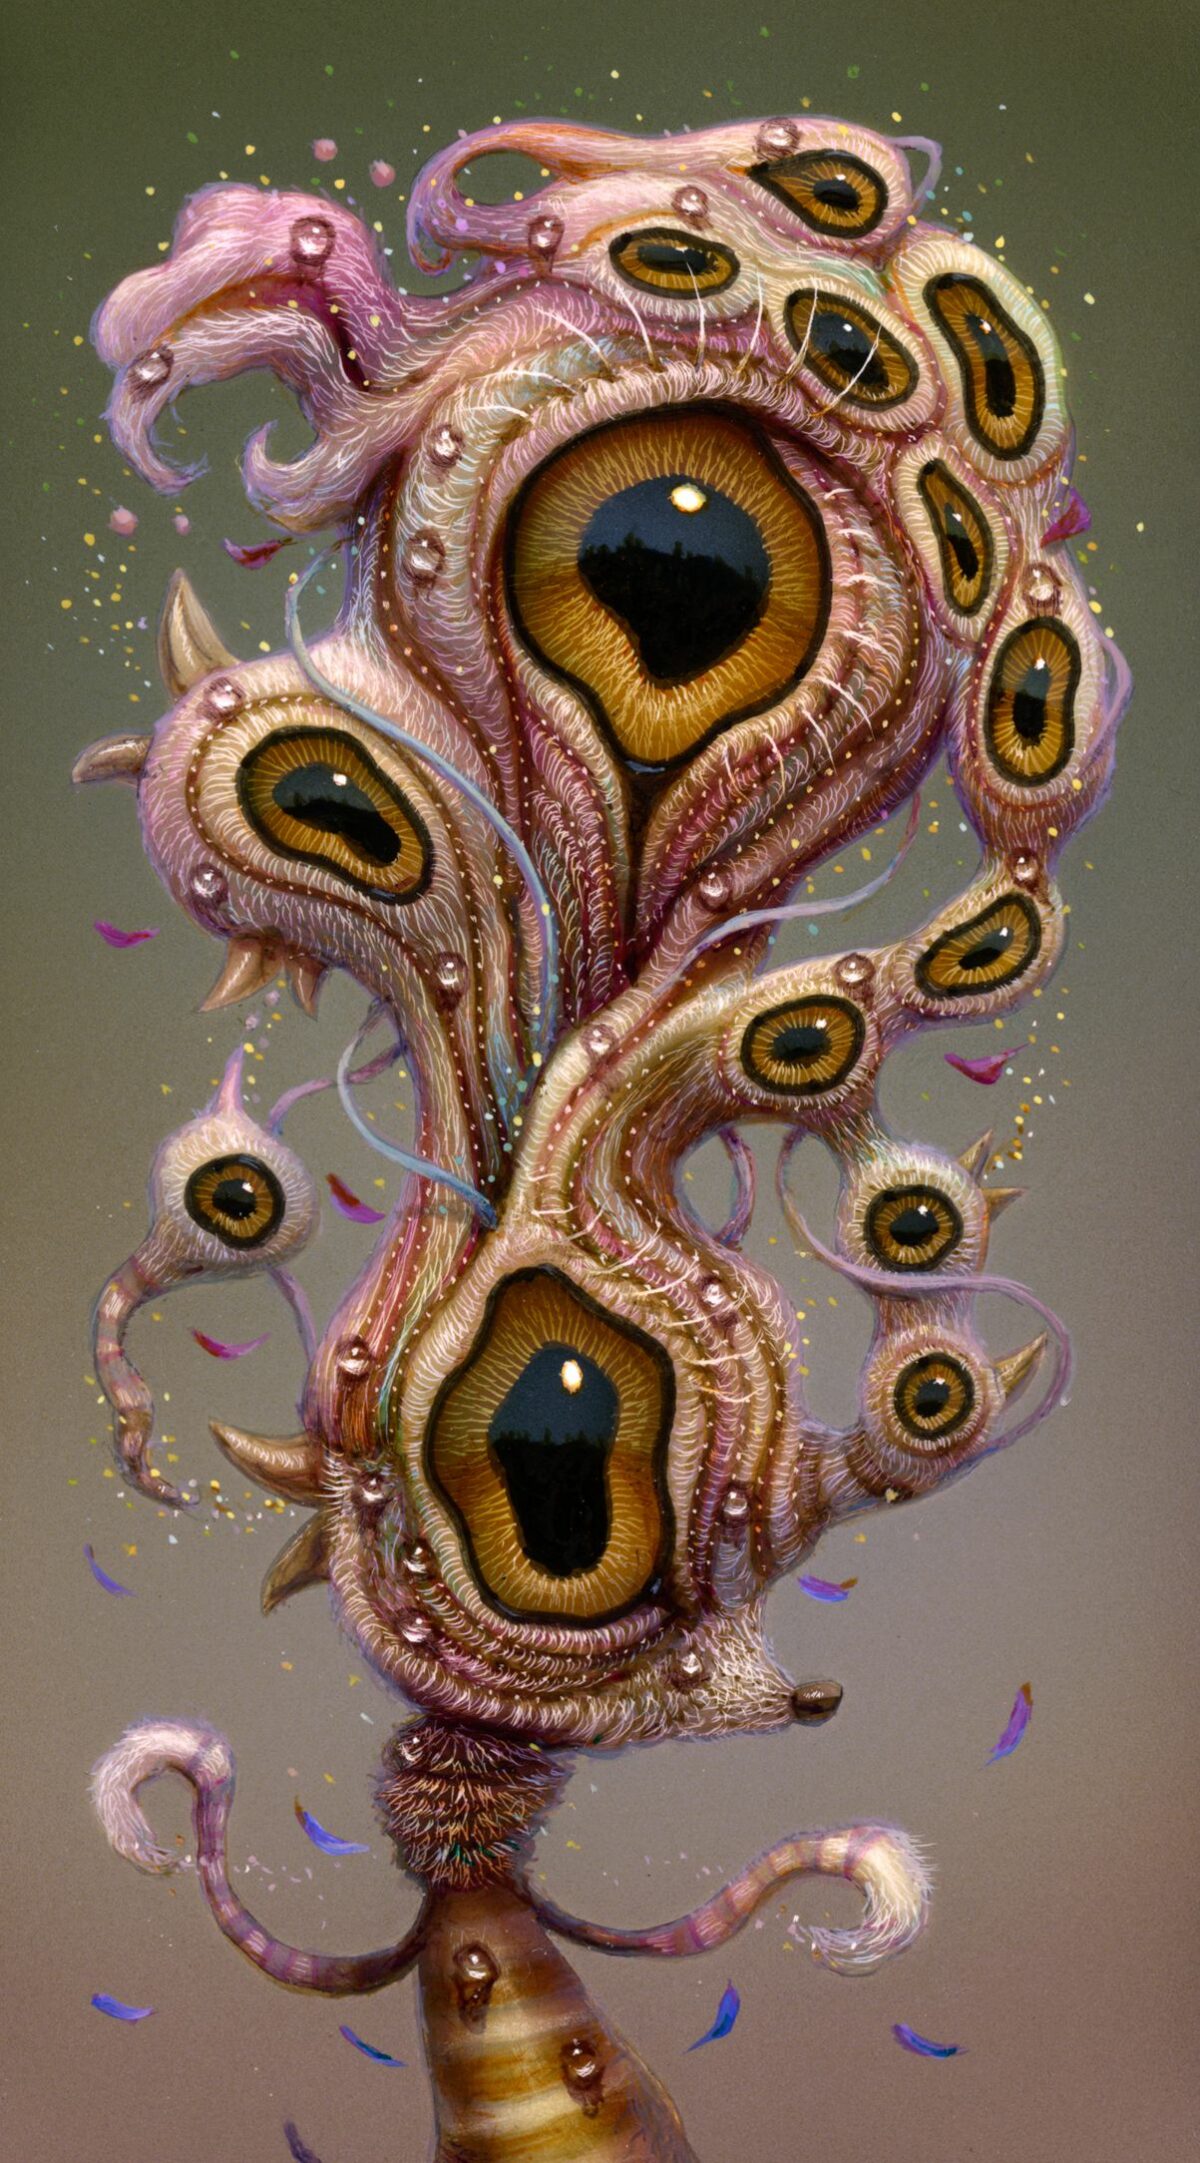 Quirky Fantastical Creatures With Oversized Eyes By Haoto Nattori 21